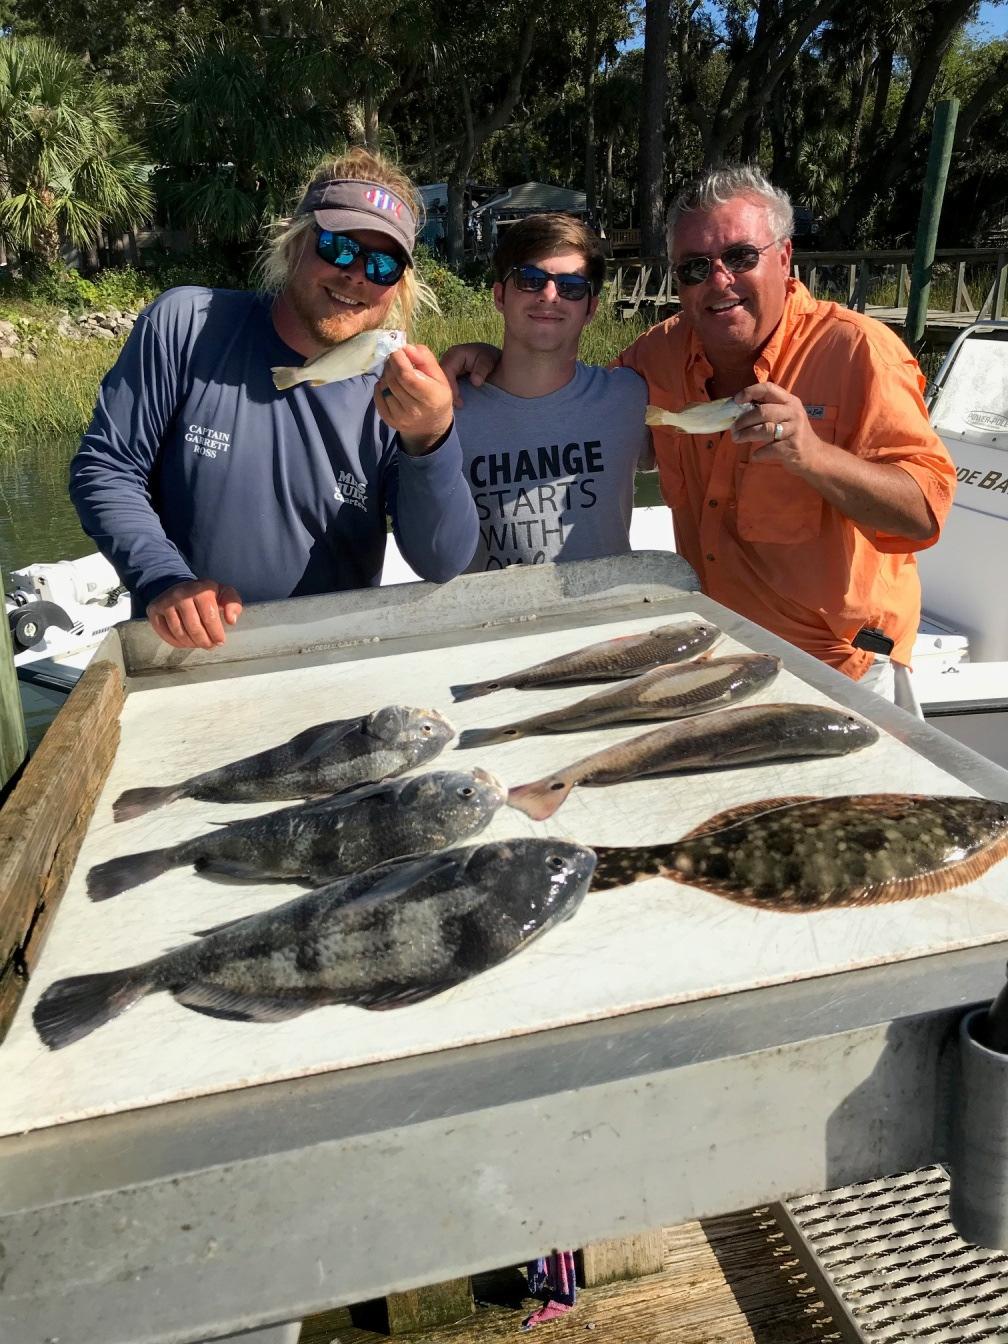 Captain Garrett Ross of Miss Judy Charters, Griffin Powell, and his father Jeff Savannah, Georgia are have a fun time showing off all of their fish! What does this mean?